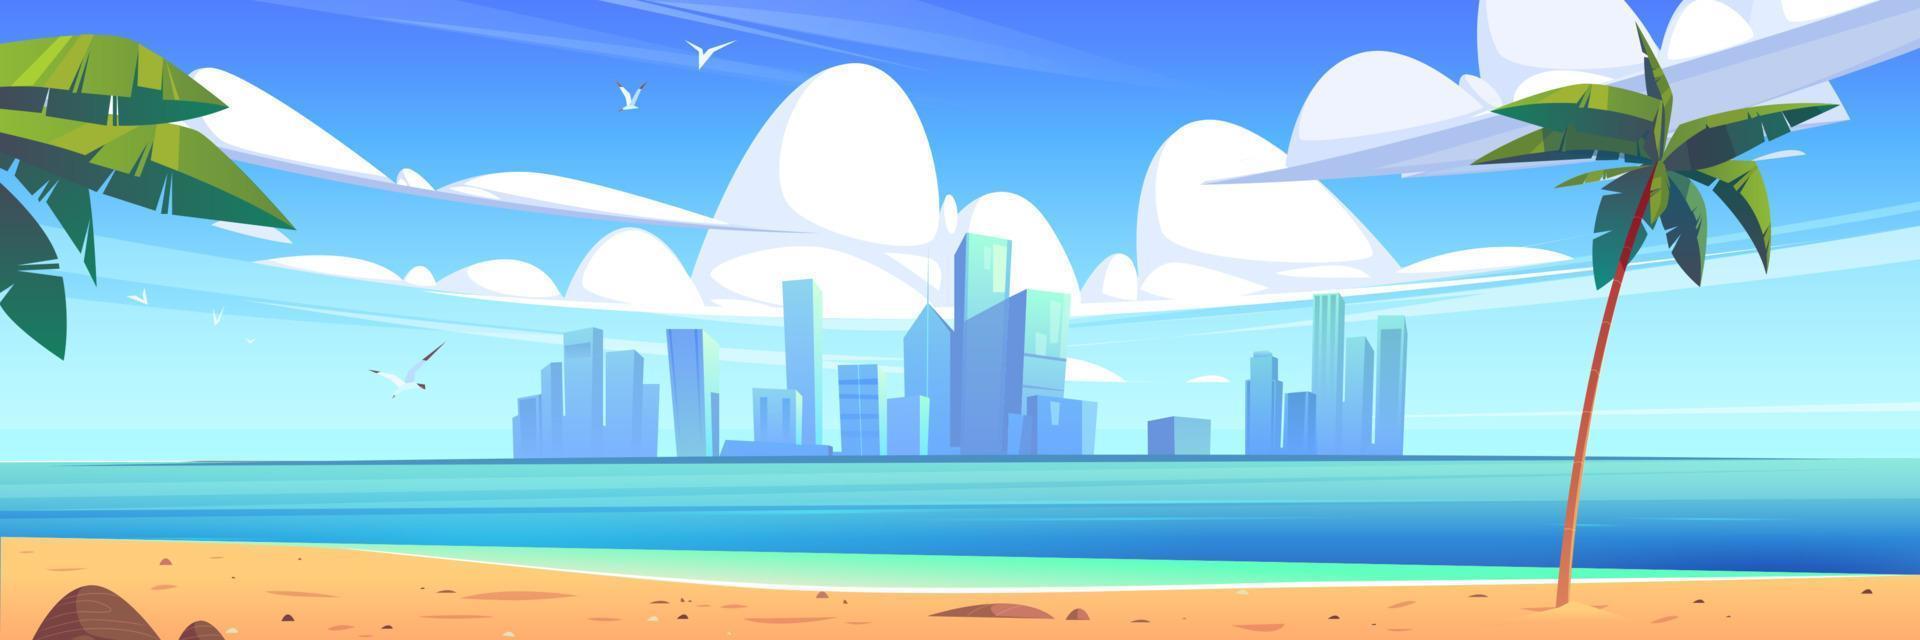 Sea landscape with beach and city on horizon vector